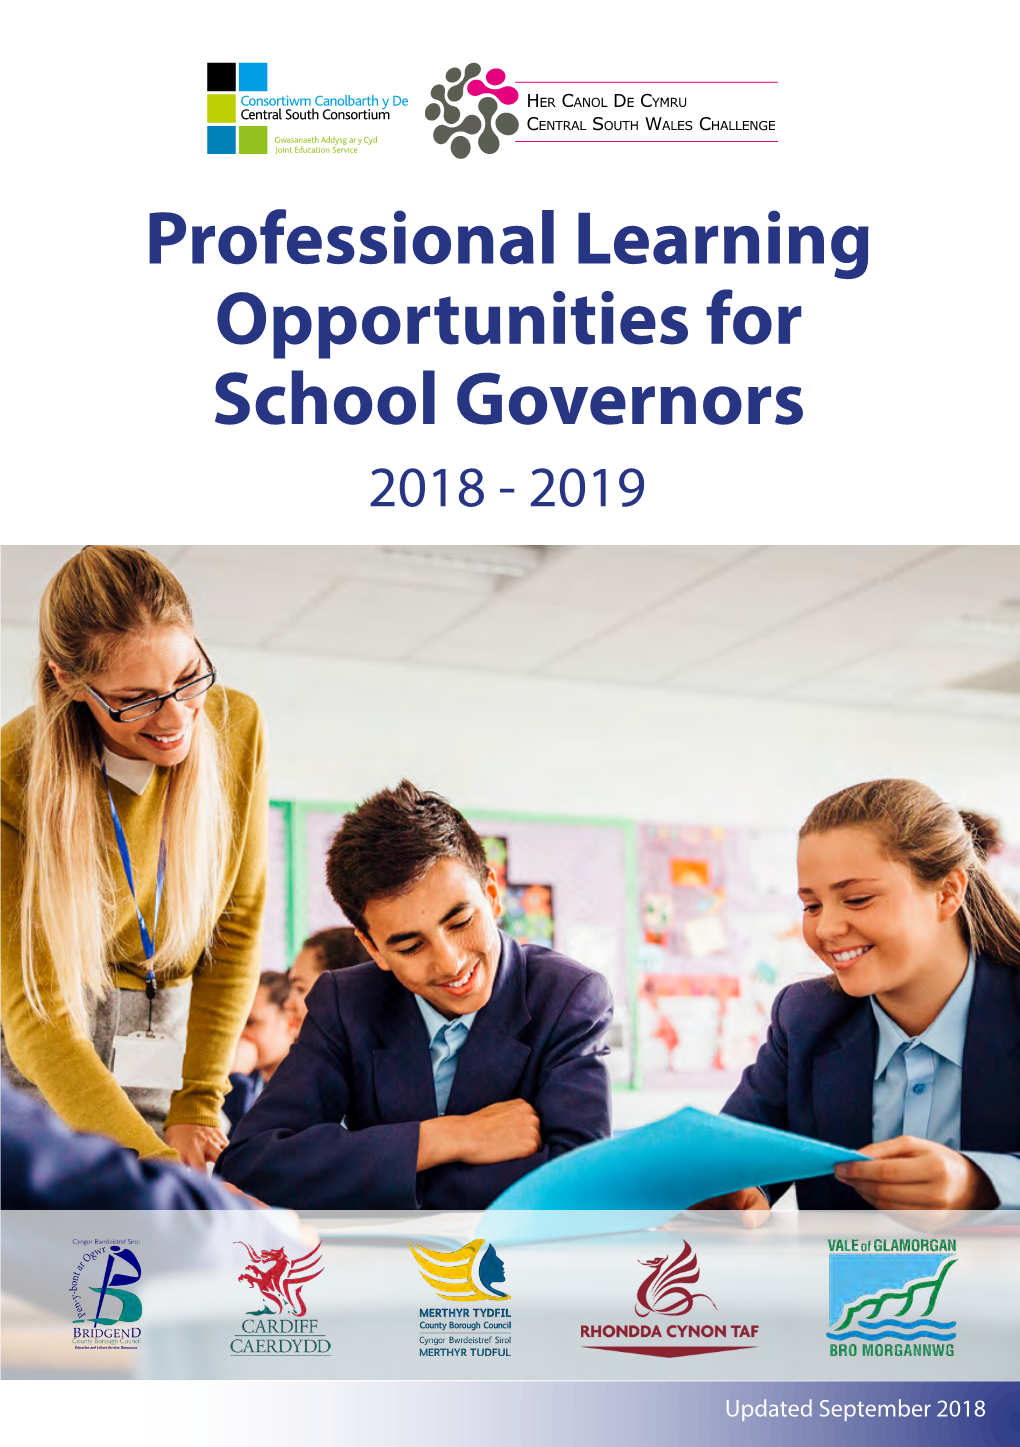 Professional Learning Opportunities for School Governors 2018 - 2019